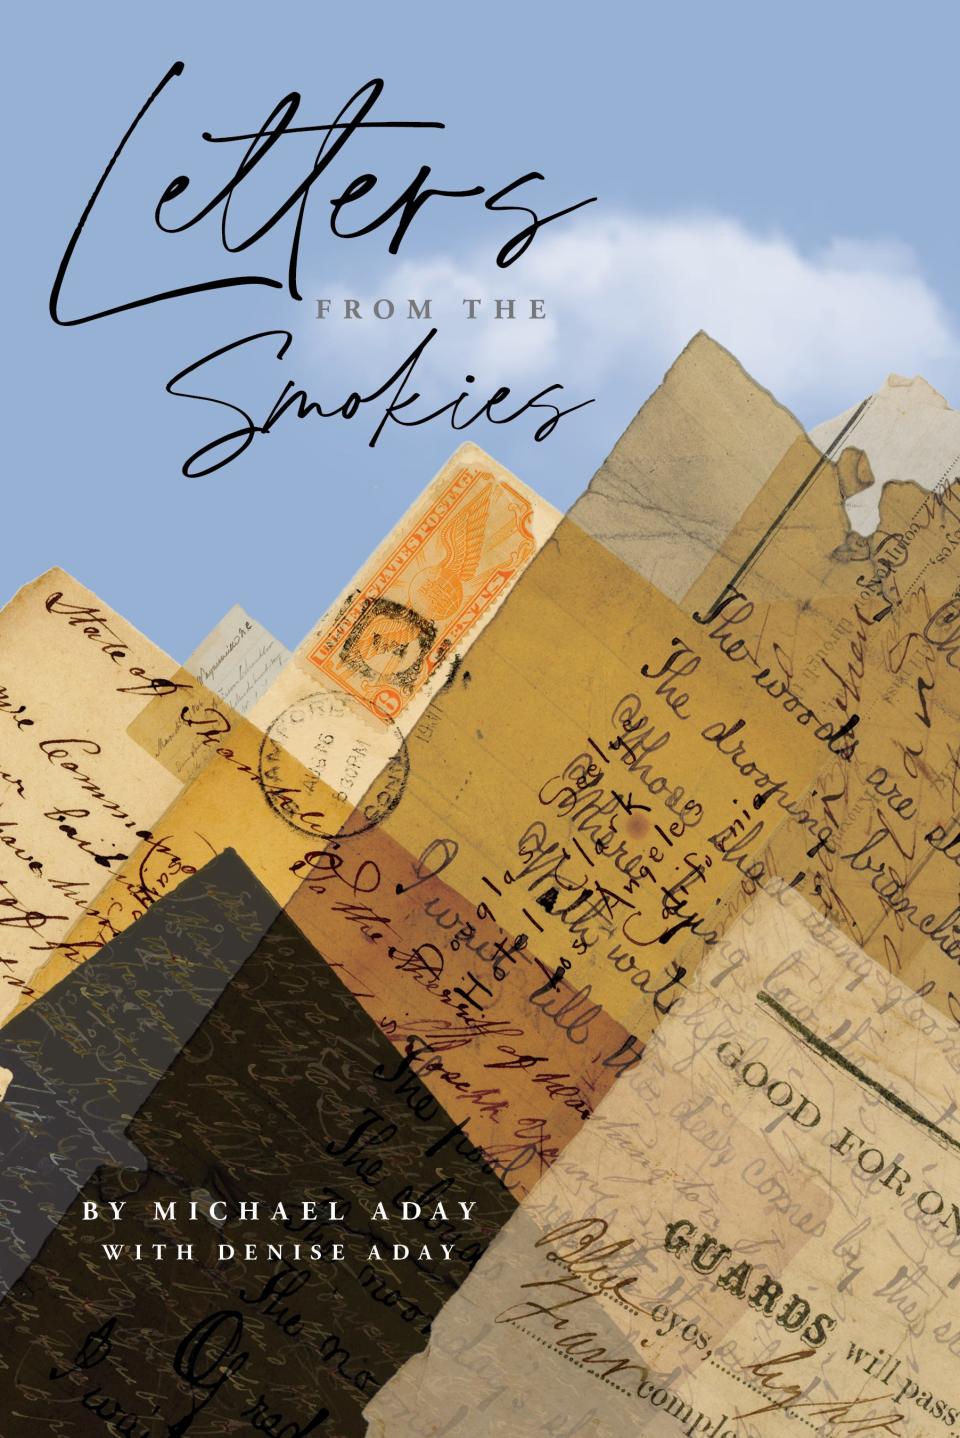 “Letters from the Smokies” by Michael Aday with Denise Aday offers 19 correspondences from the Great Smoky Mountains National Park archives written over the span of 230 years.